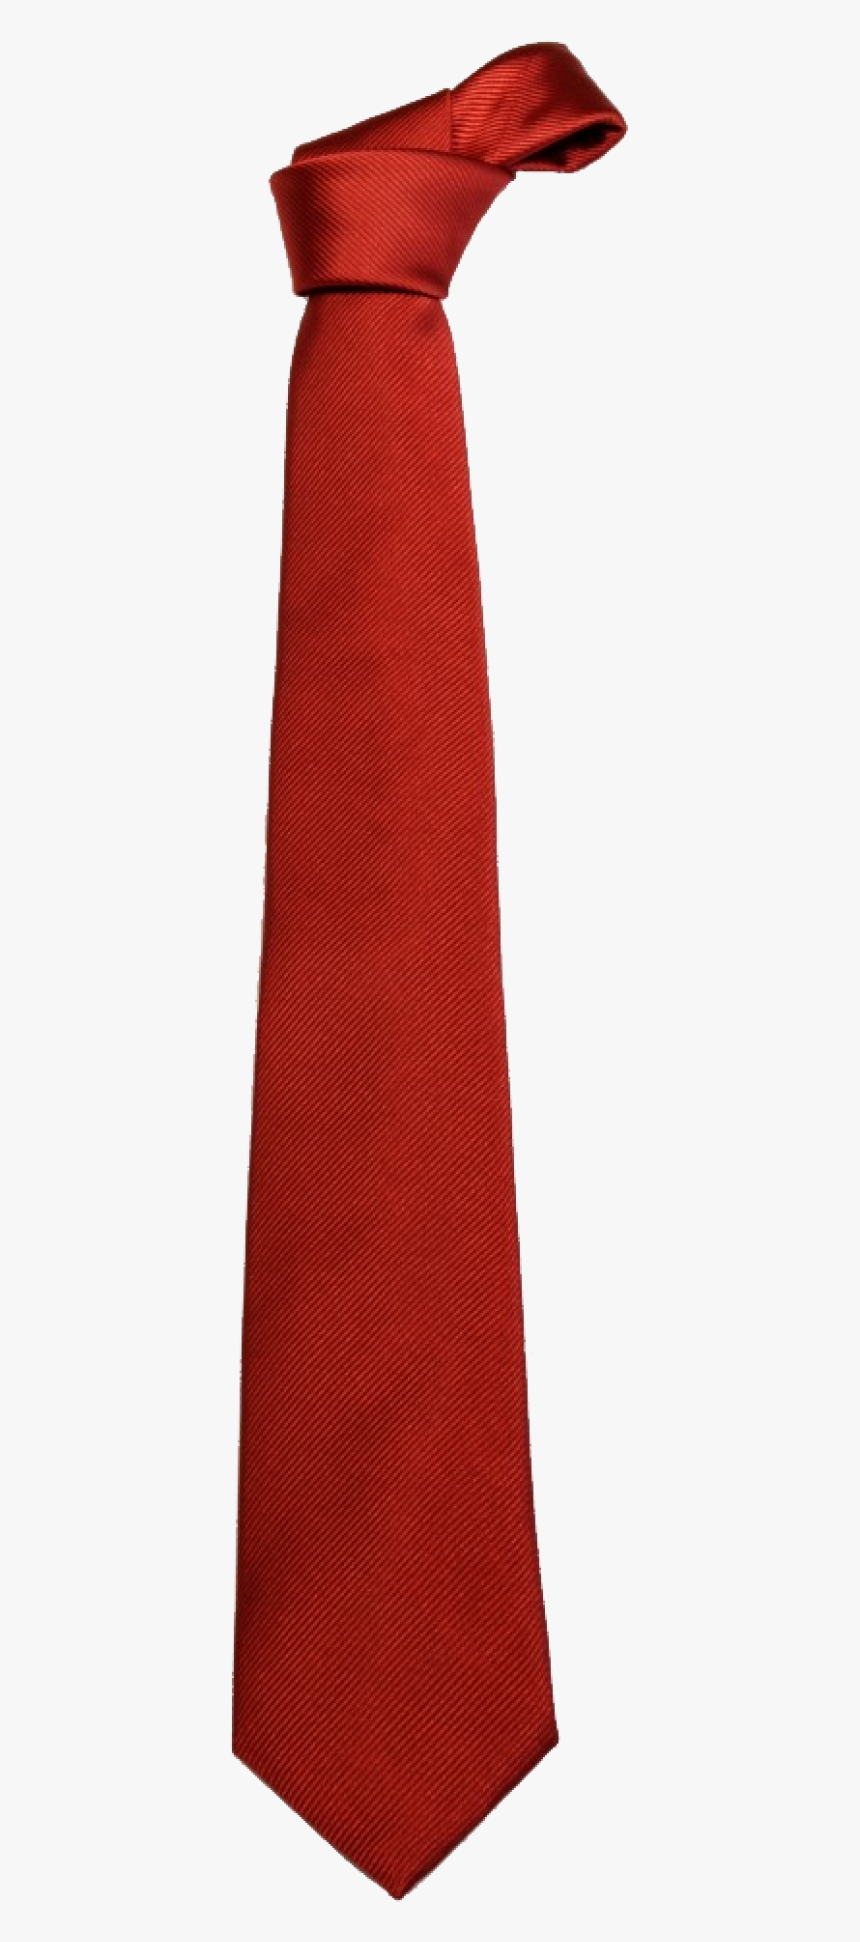 Red Tie Background Transparent"
								 Title="red - Silk, HD Png Download, Free Download